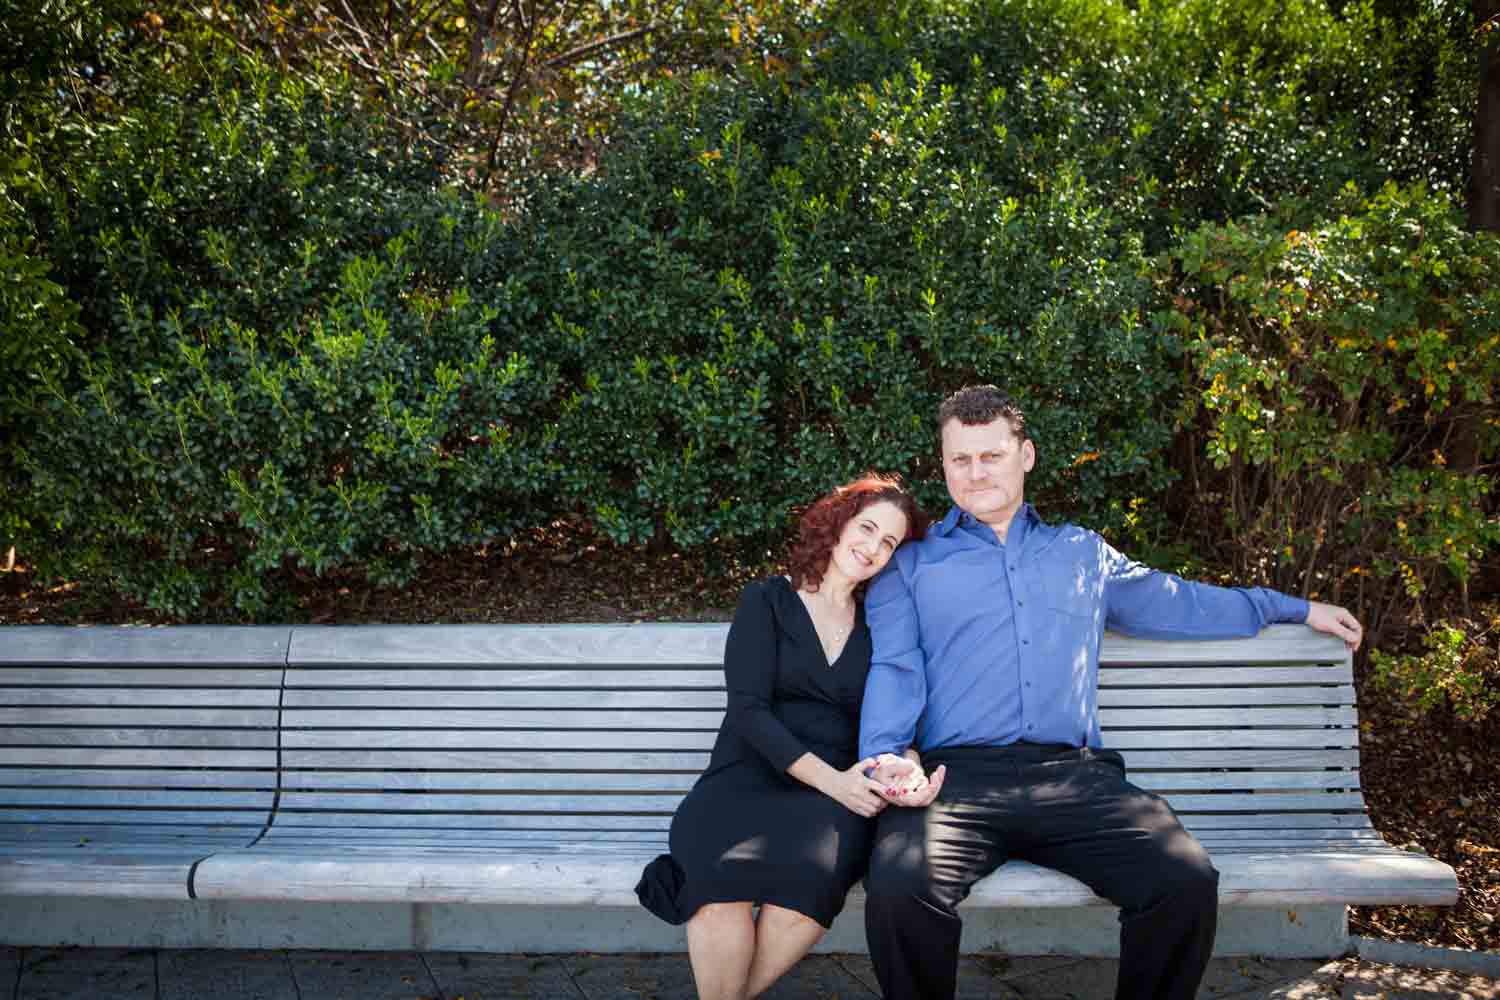 Couple sitting together on bench in park